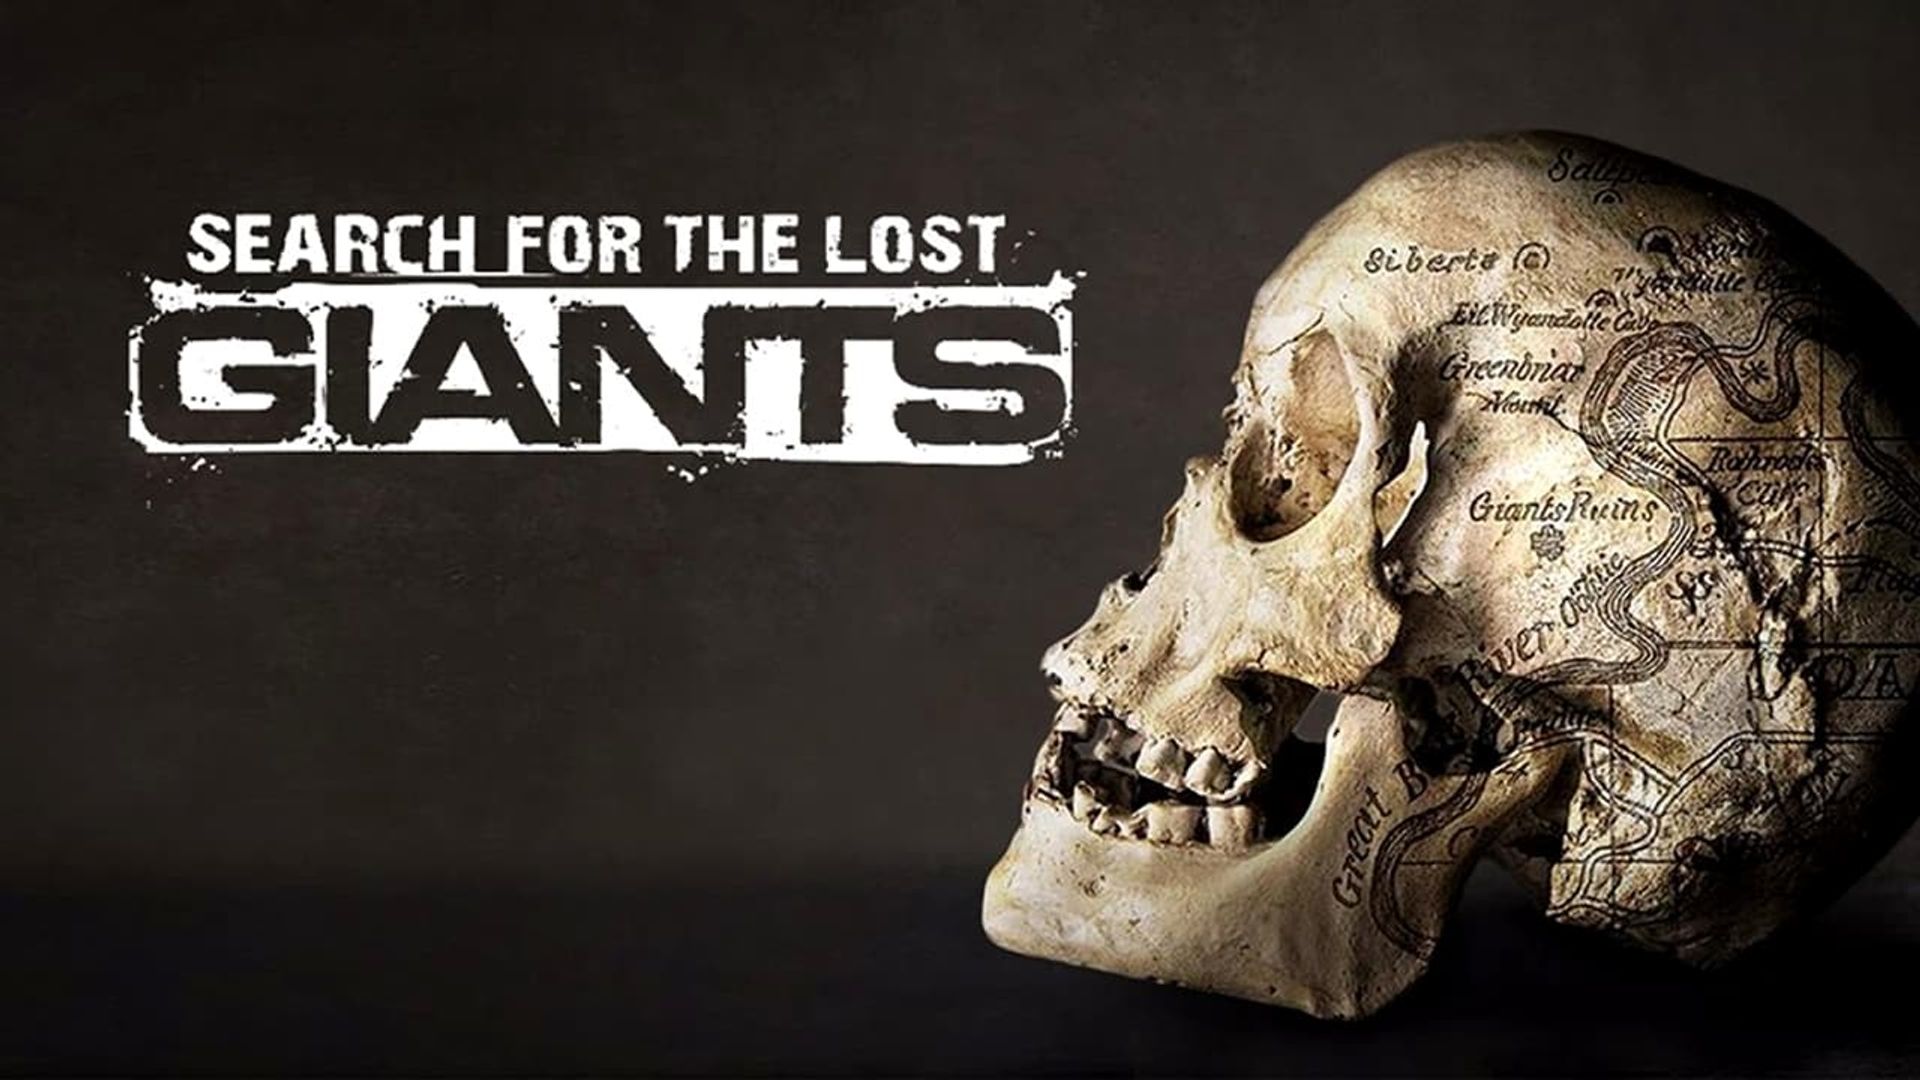 Search for the Lost Giants background